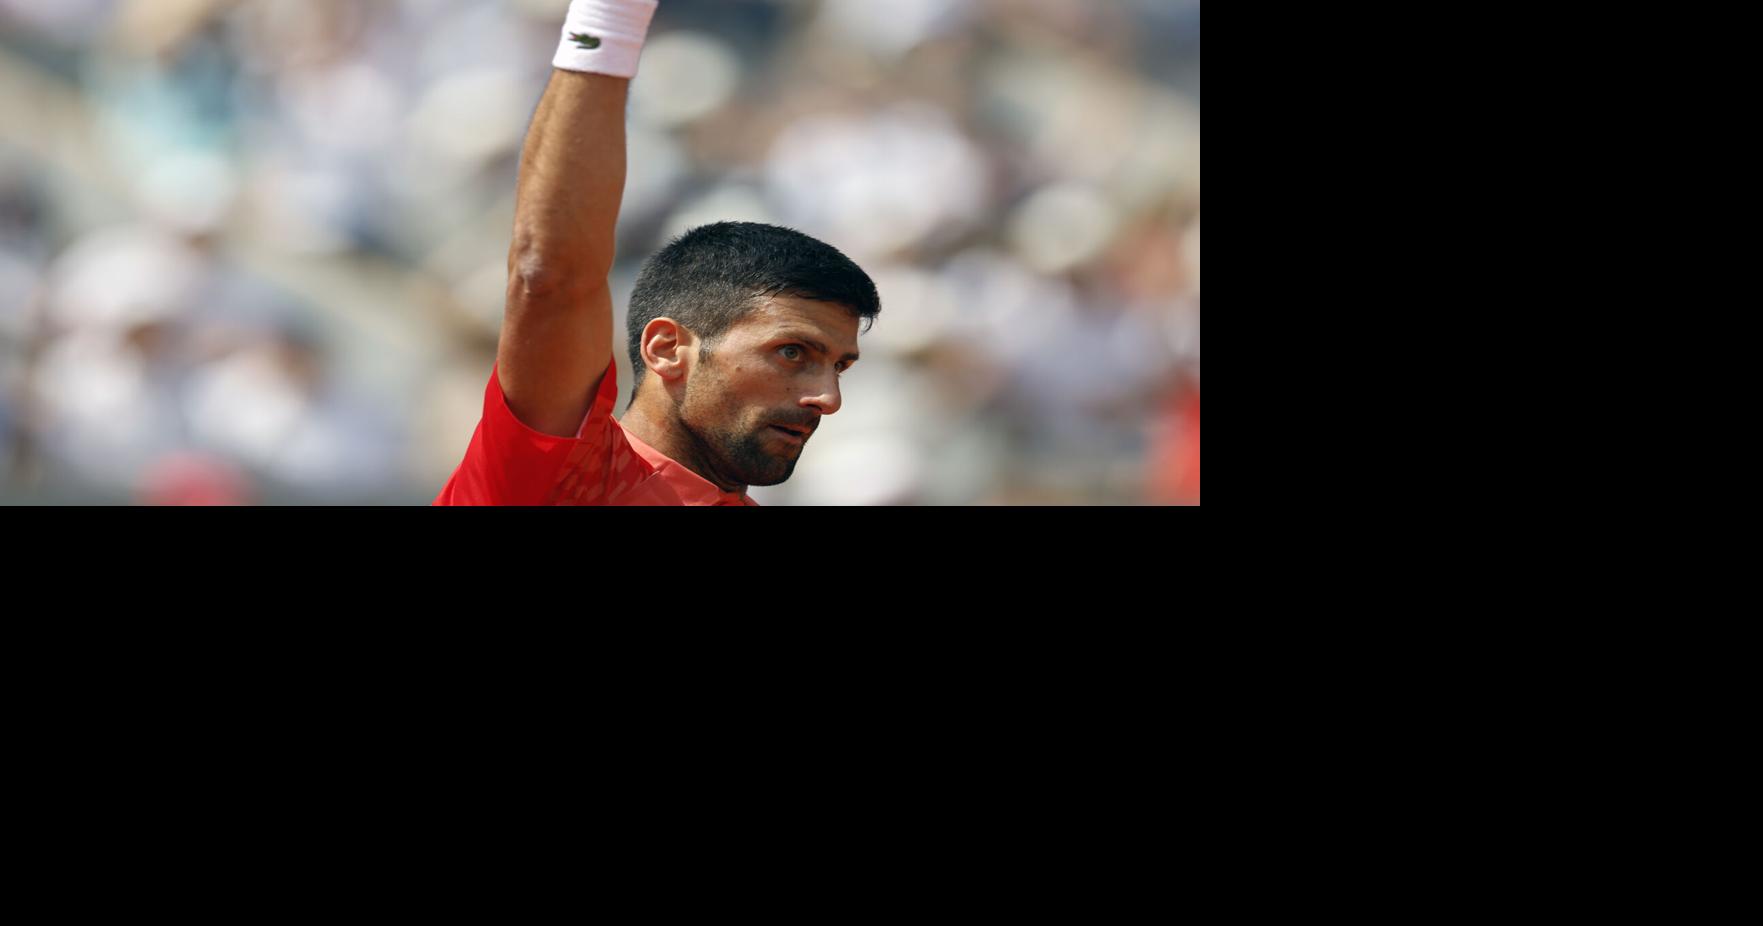 Novak Djokovic nears his 23rd Grand Slam title at the French Open after Carlos Alcaraz cramps up |